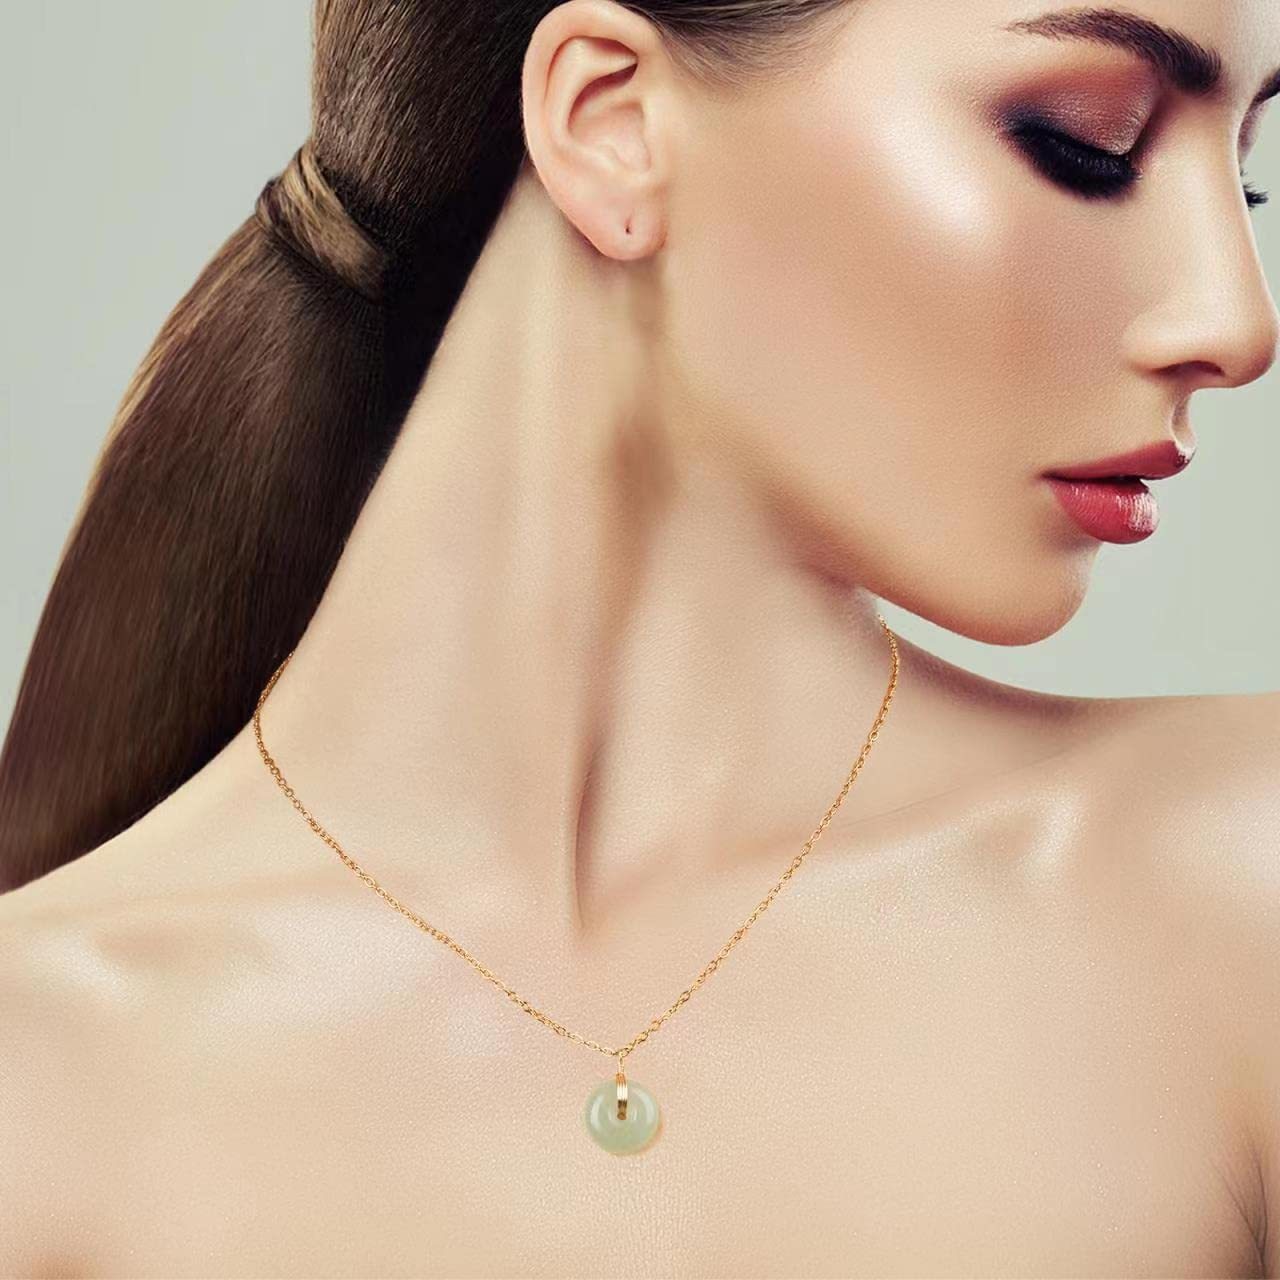 Jade Necklace 925 Sterling Silver 18K Gold Plated Jade Pendant Necklace for Women Green Hetian Jade Jewelry Good Luck Gift (0.47in)